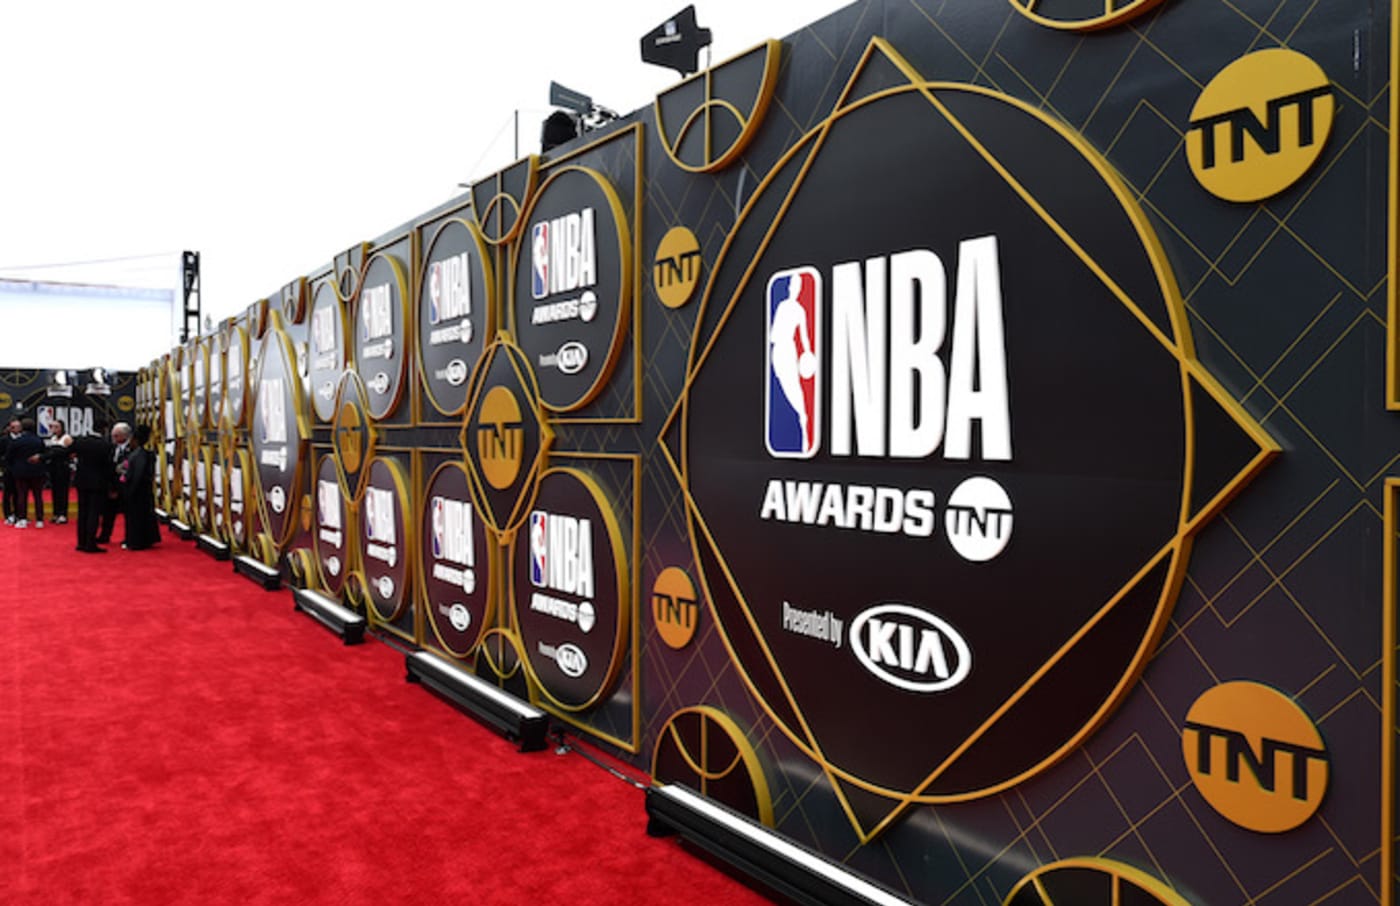 A view of the red carpet during the 2019 NBA Awards.